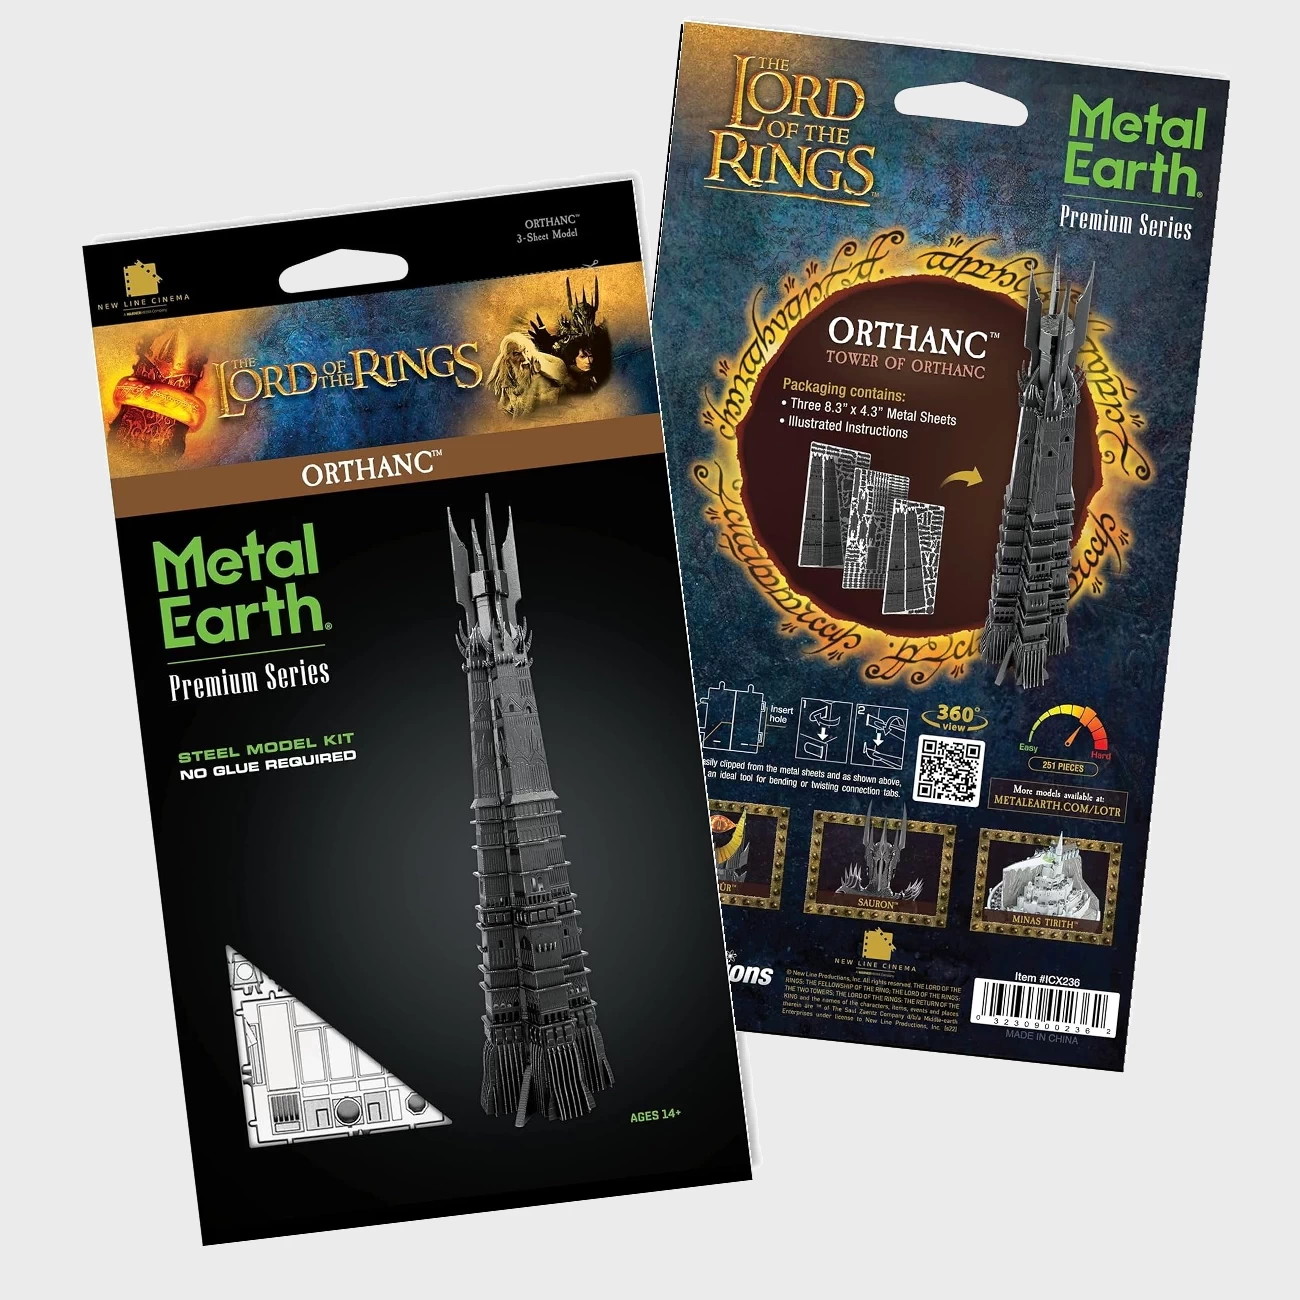 Metal Earth - Orthanc - The Lord of the Rings (Premium Series )